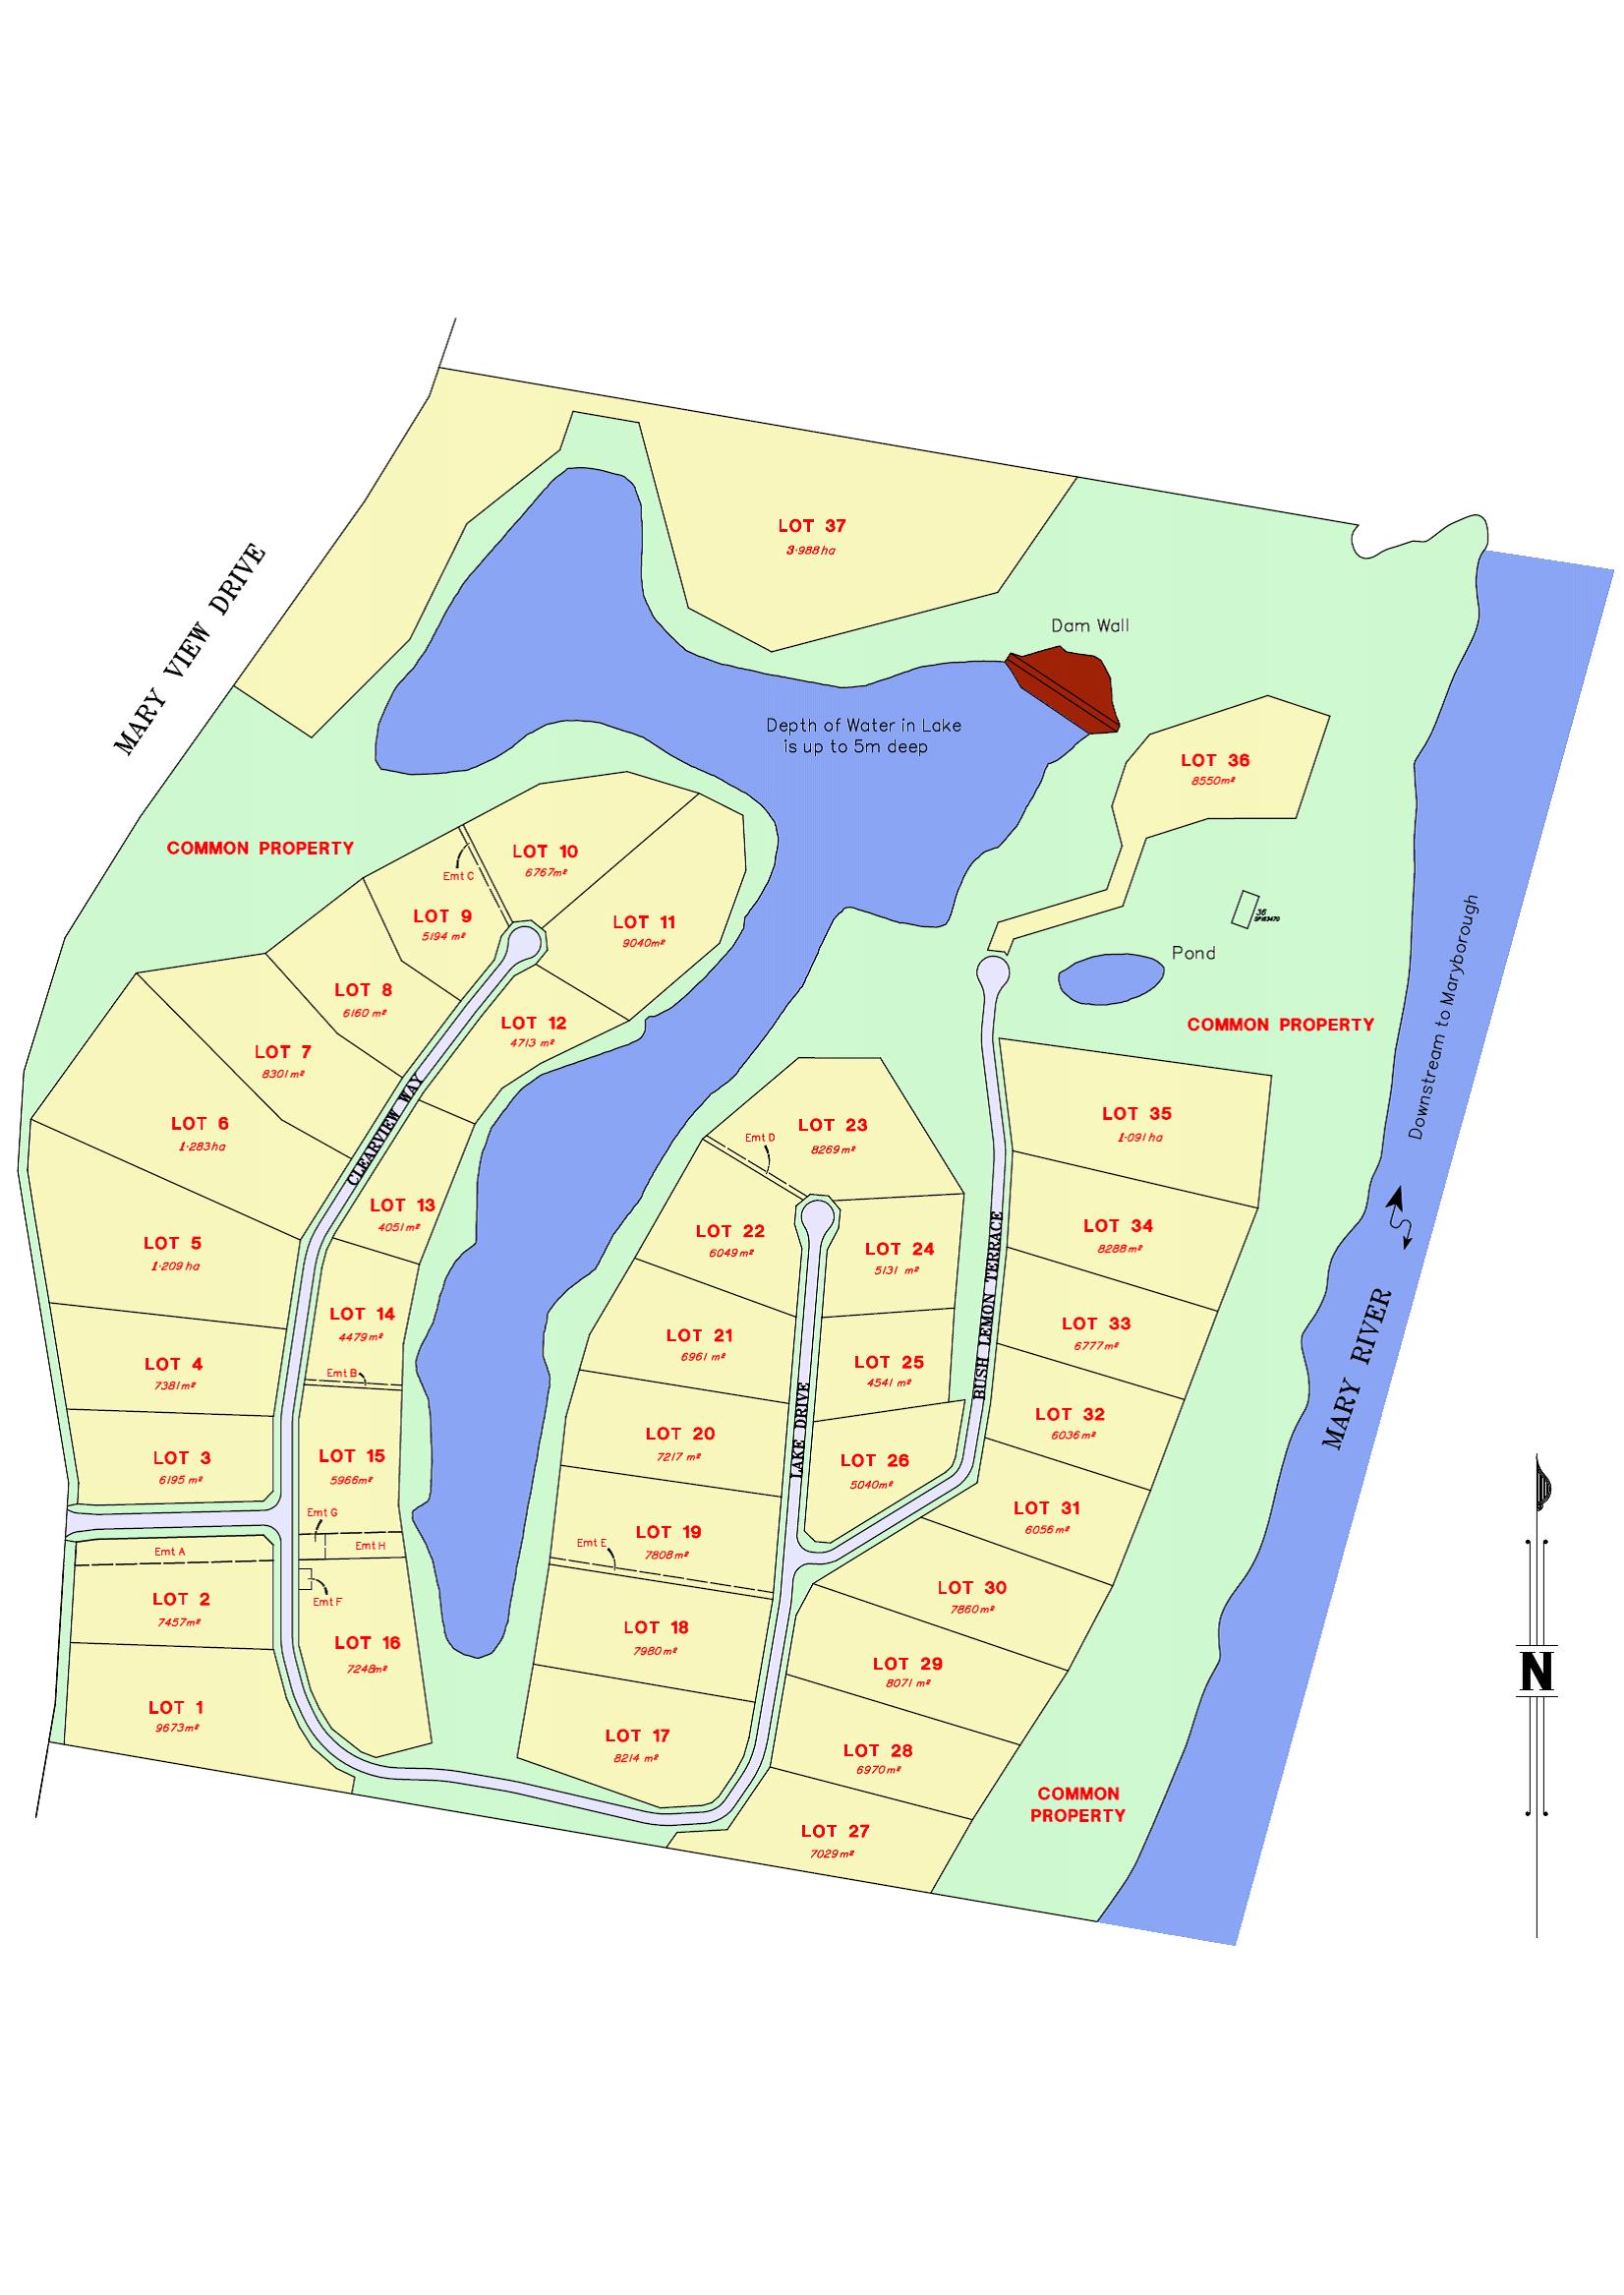 Lot 36, Mary View Drive, Yengarie, QLD 4650